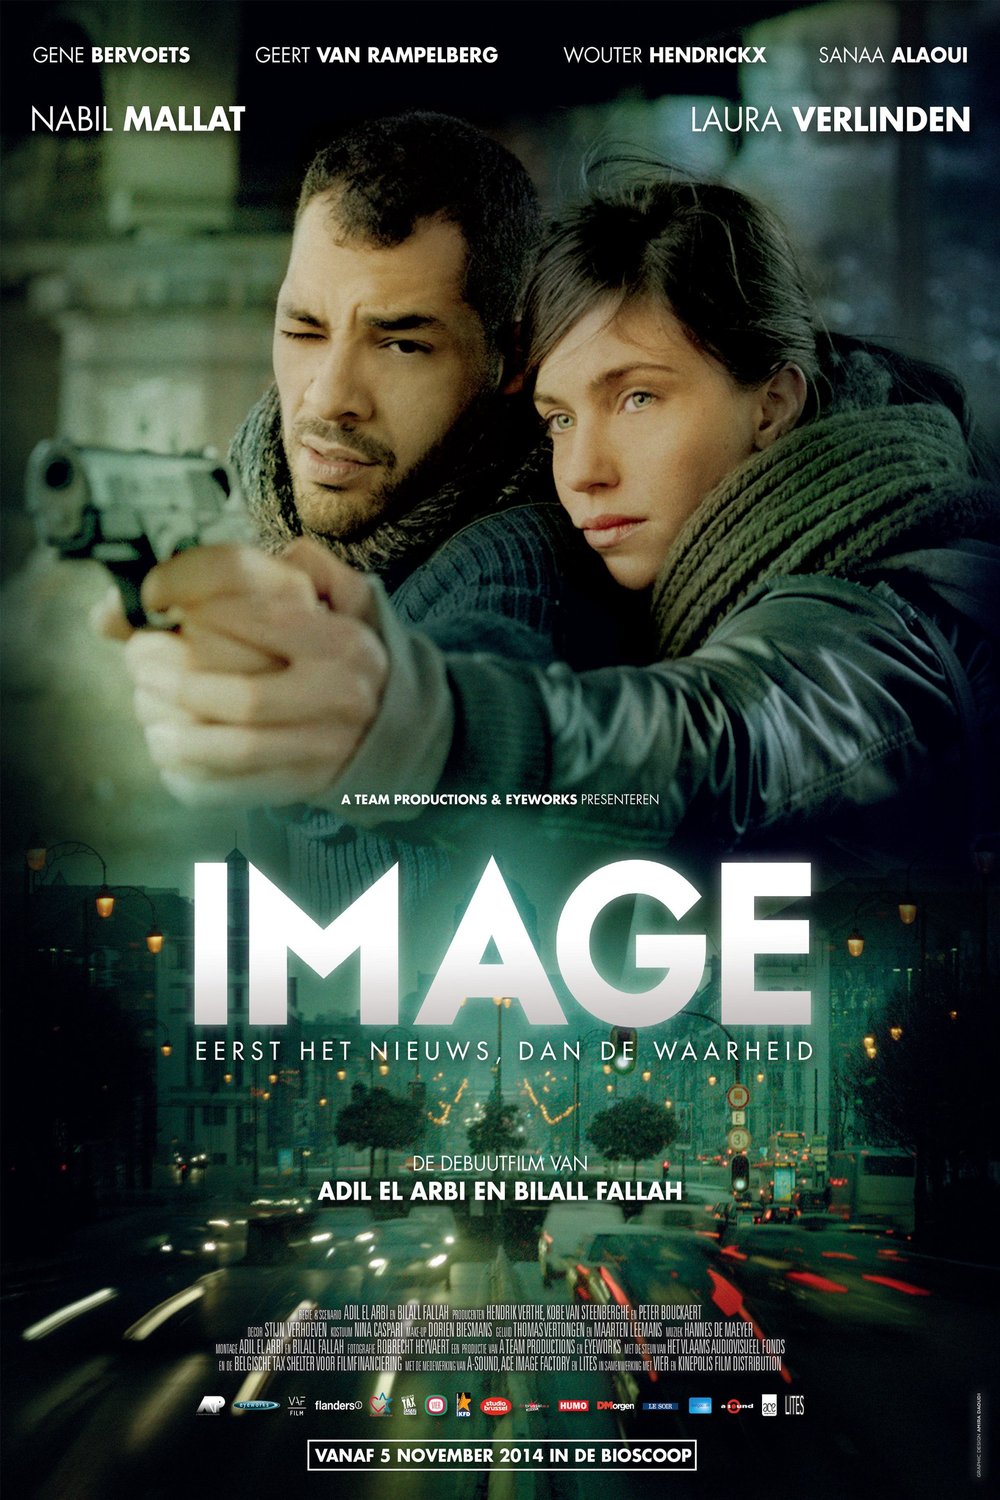 Poster of the movie Image